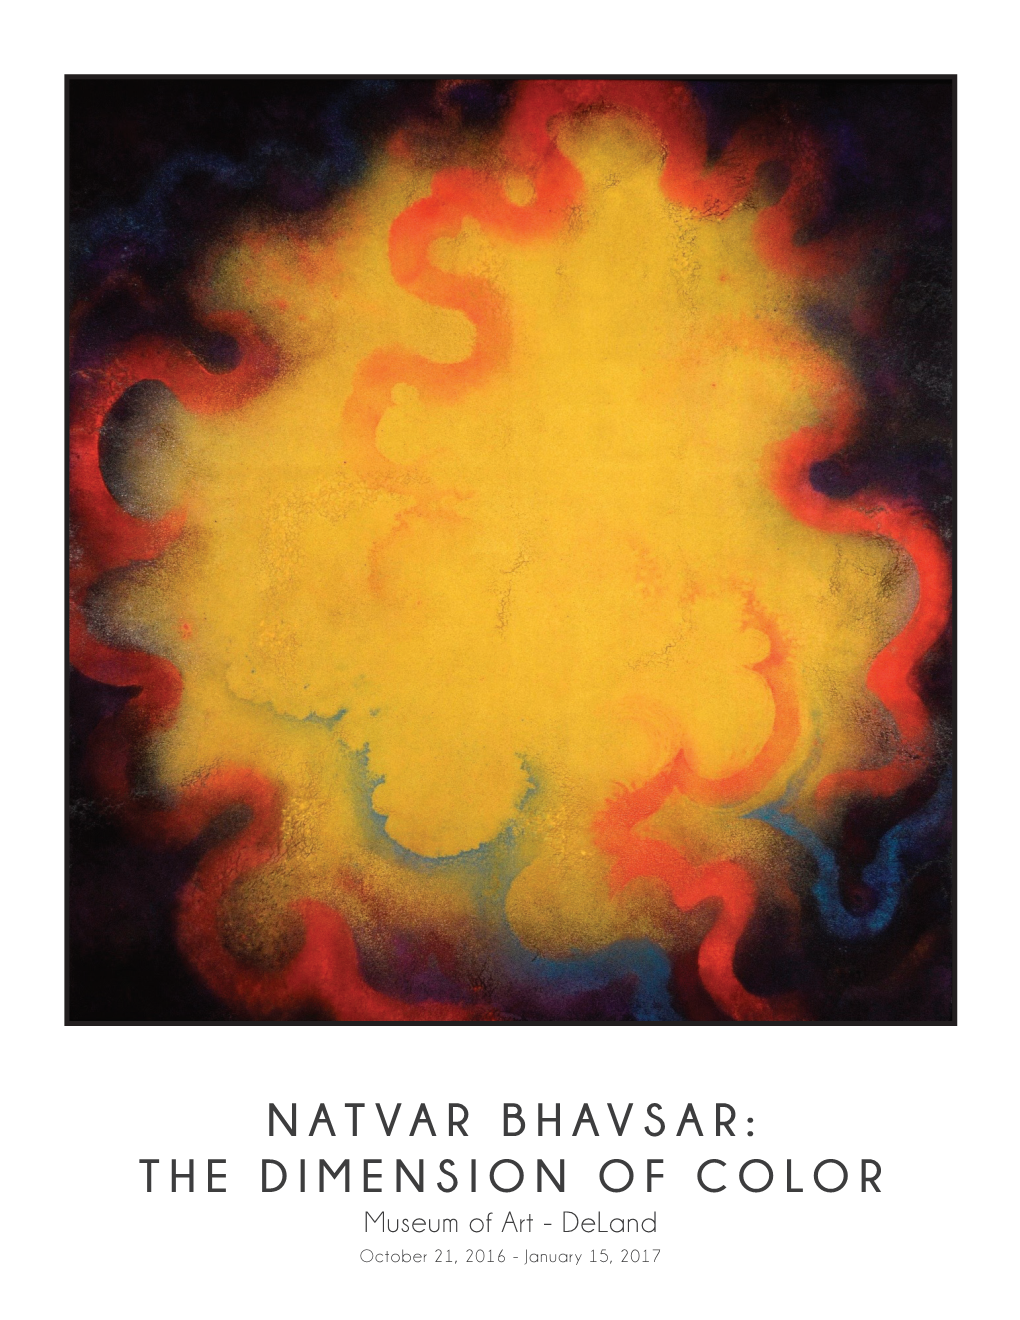 NATVAR BHAVSAR: the DIMENSION of COLOR Museum of Art - Deland October 21, 2016 - January 15, 2017 Acknowledgments